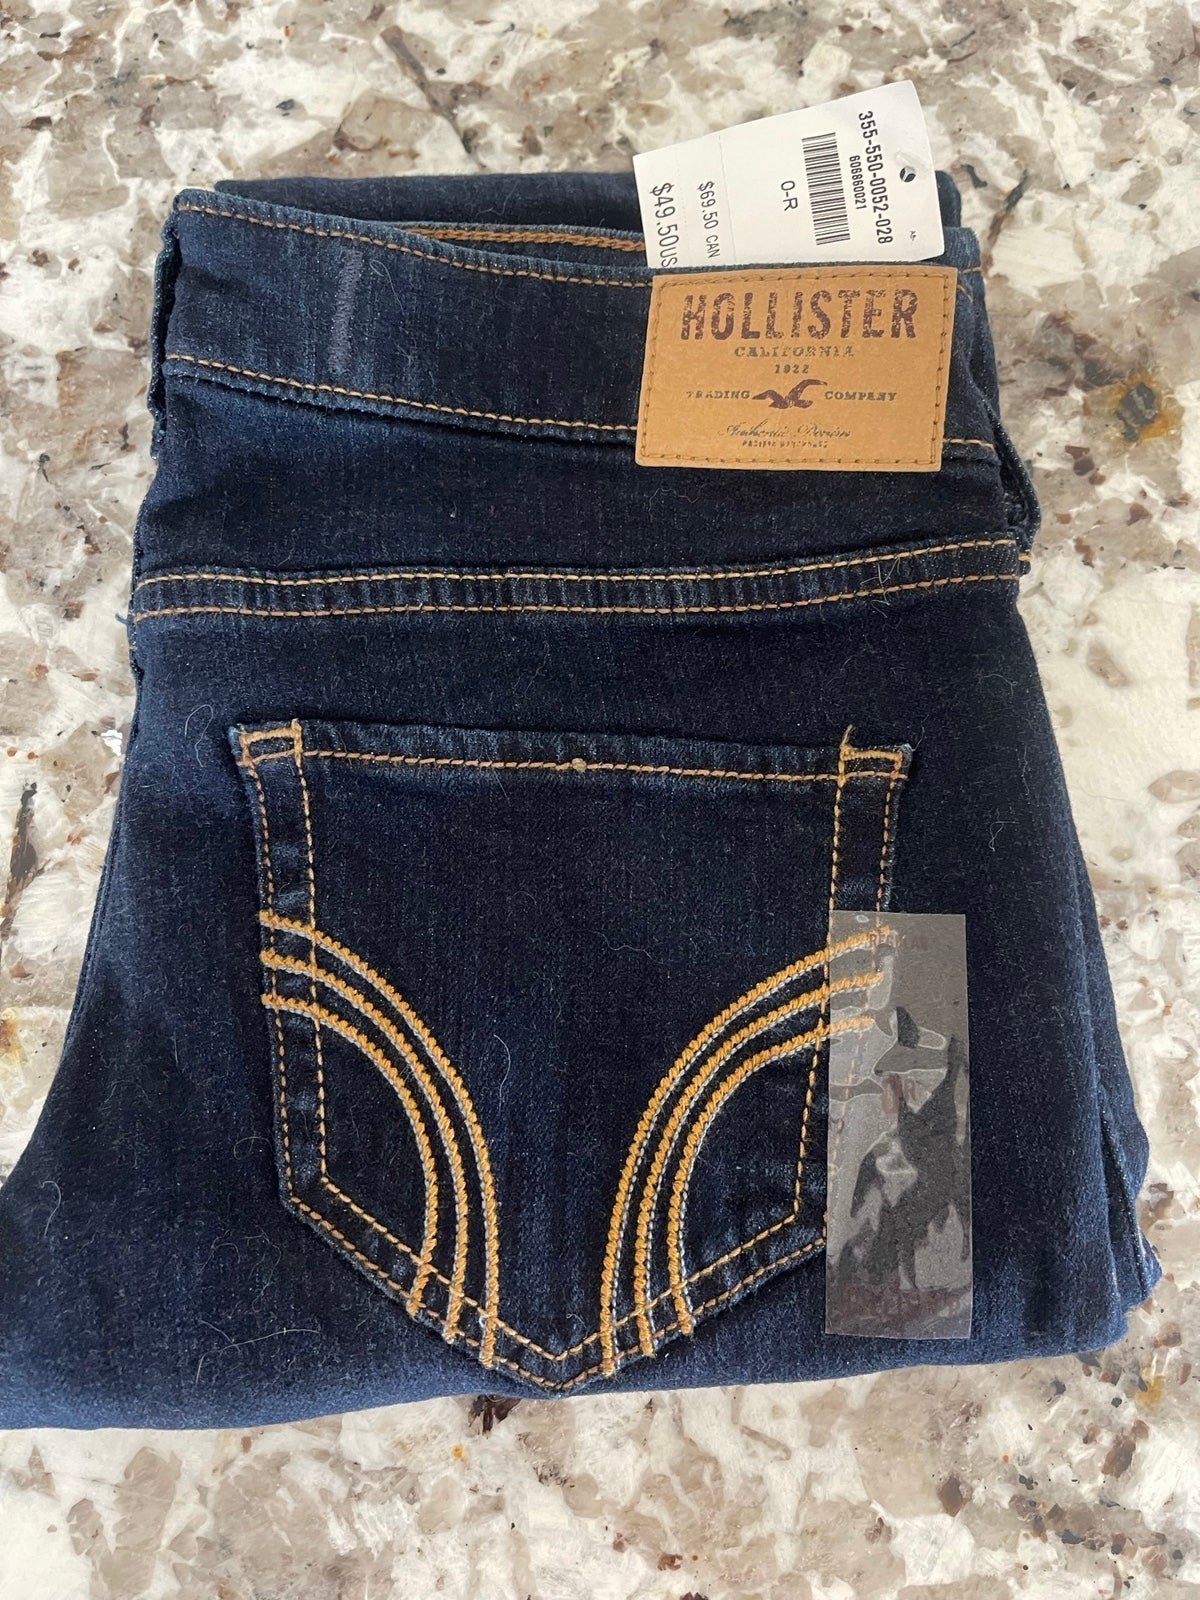 high discount HOLLISTER NWT Skinny Jeans Size 24 X 31 geuIqqNnD Cool